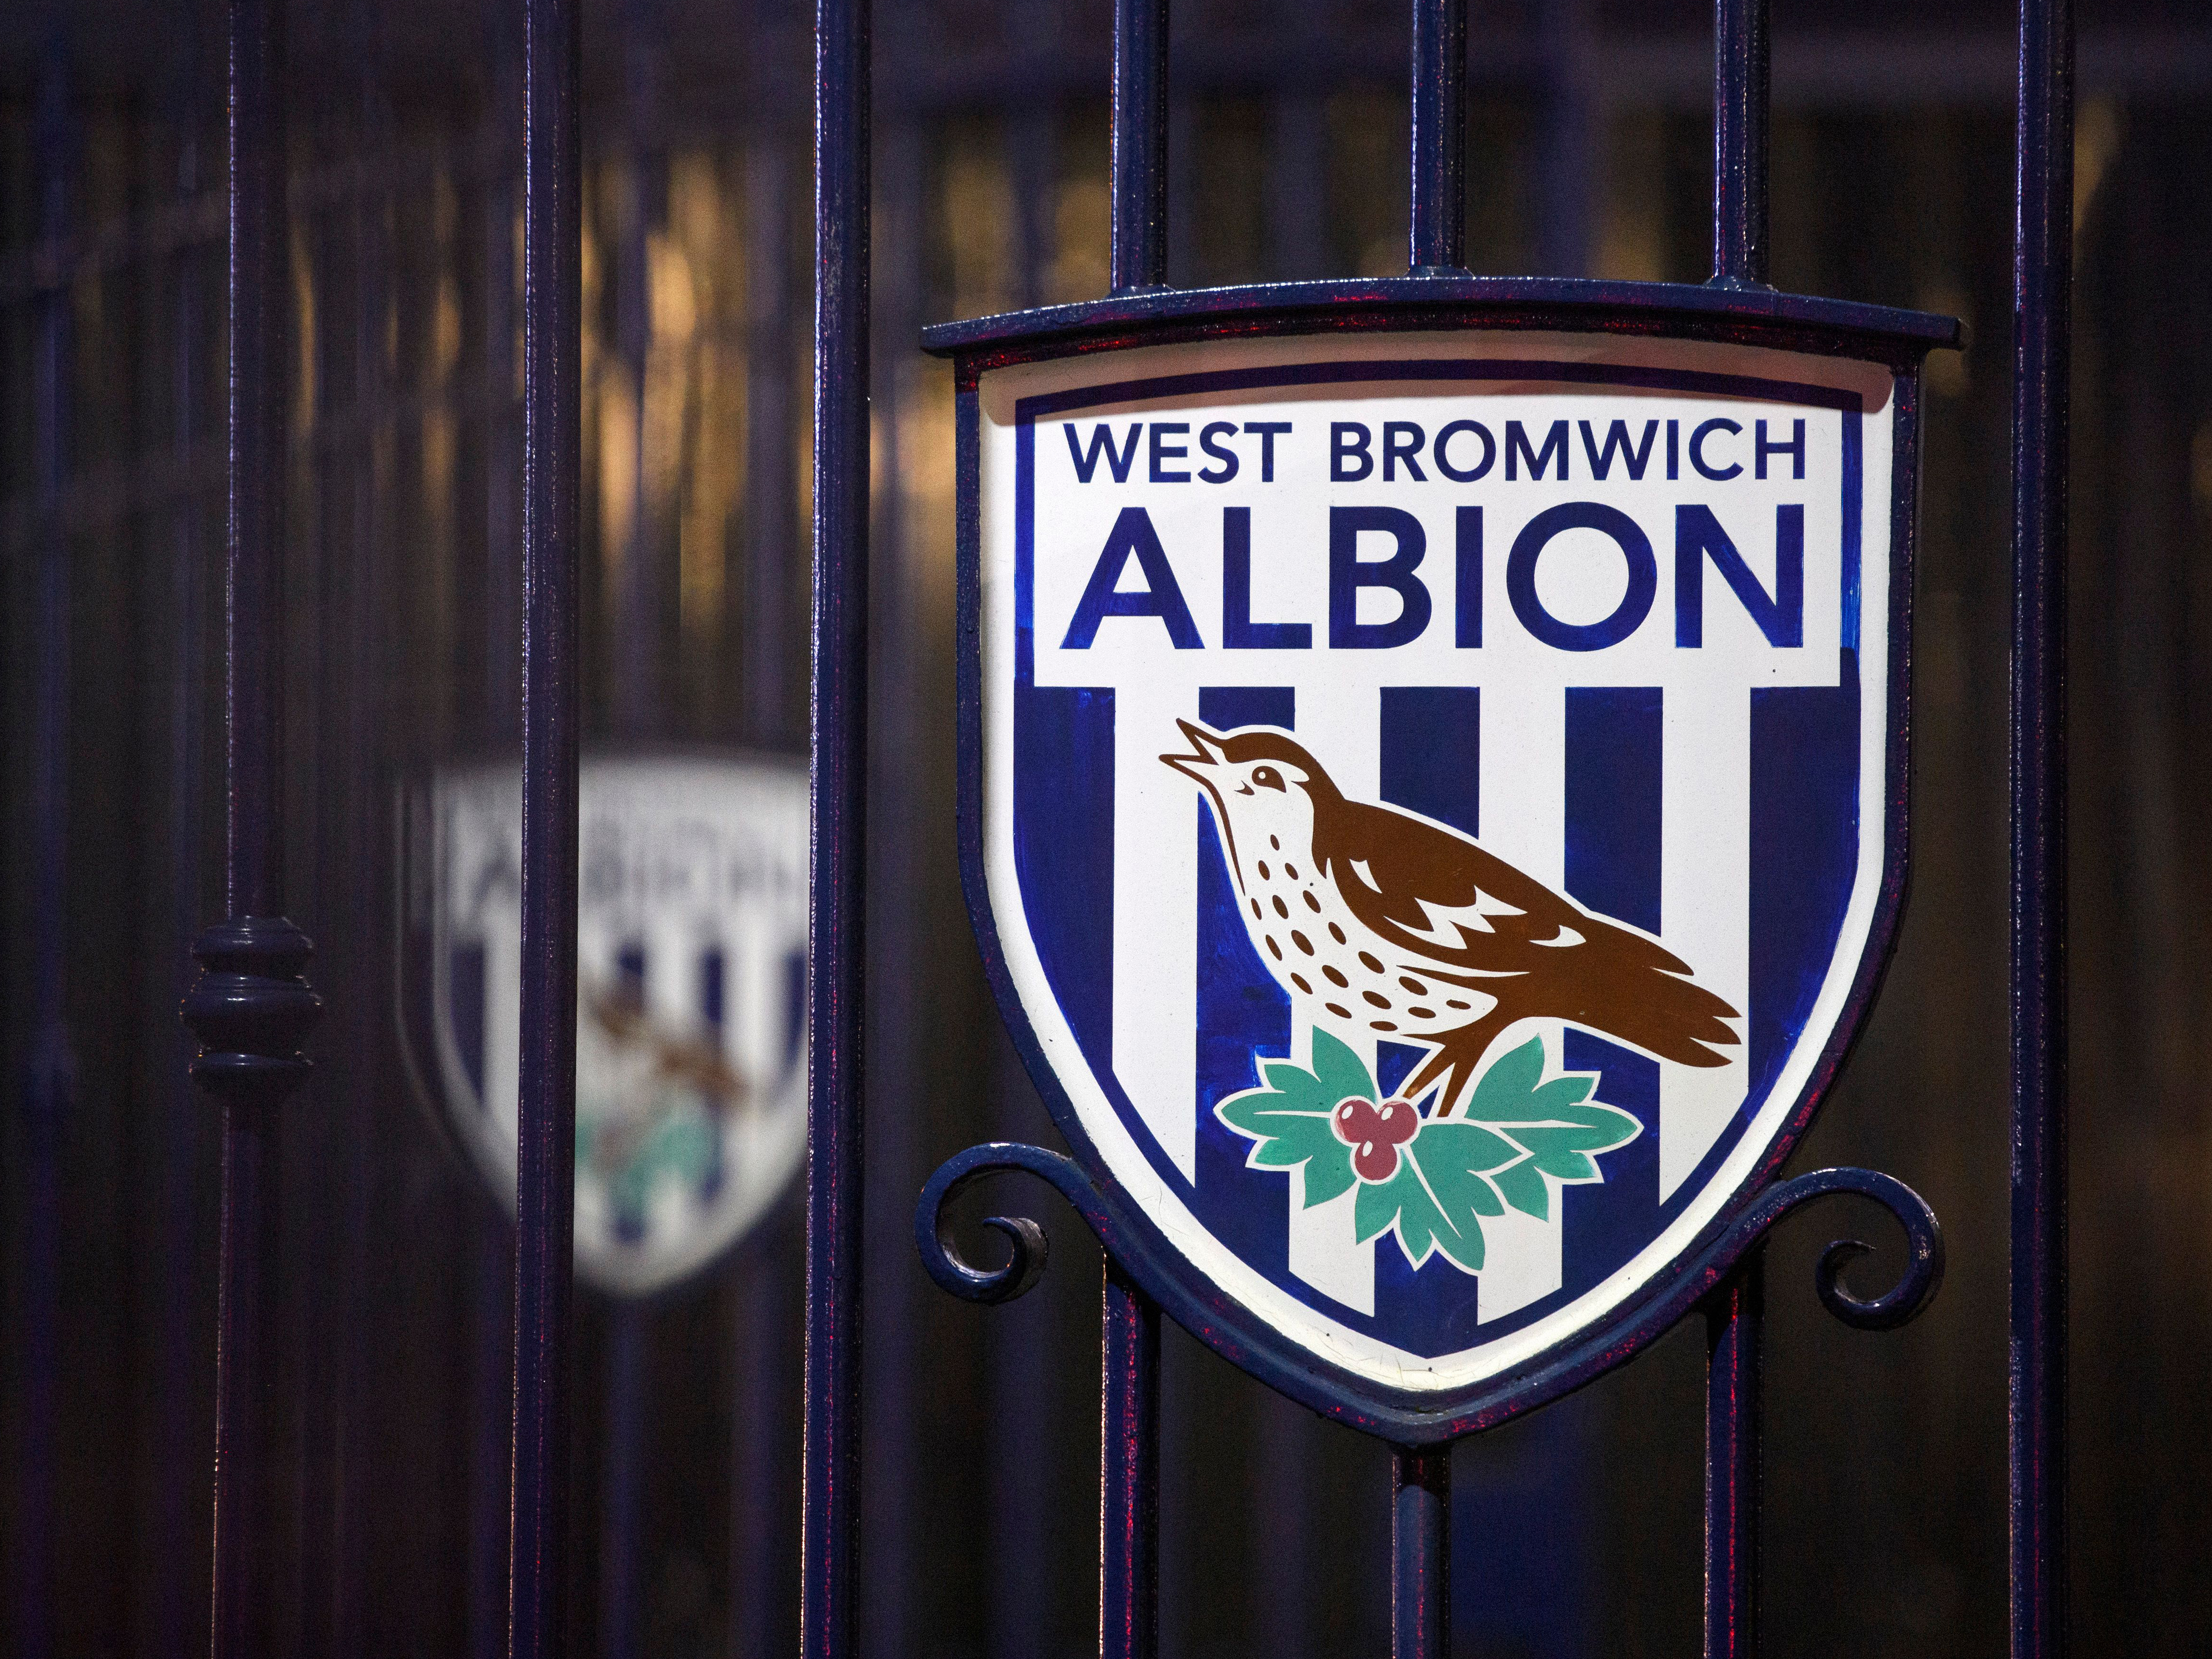 An image of a club crest on the gates outside The Hawthorns